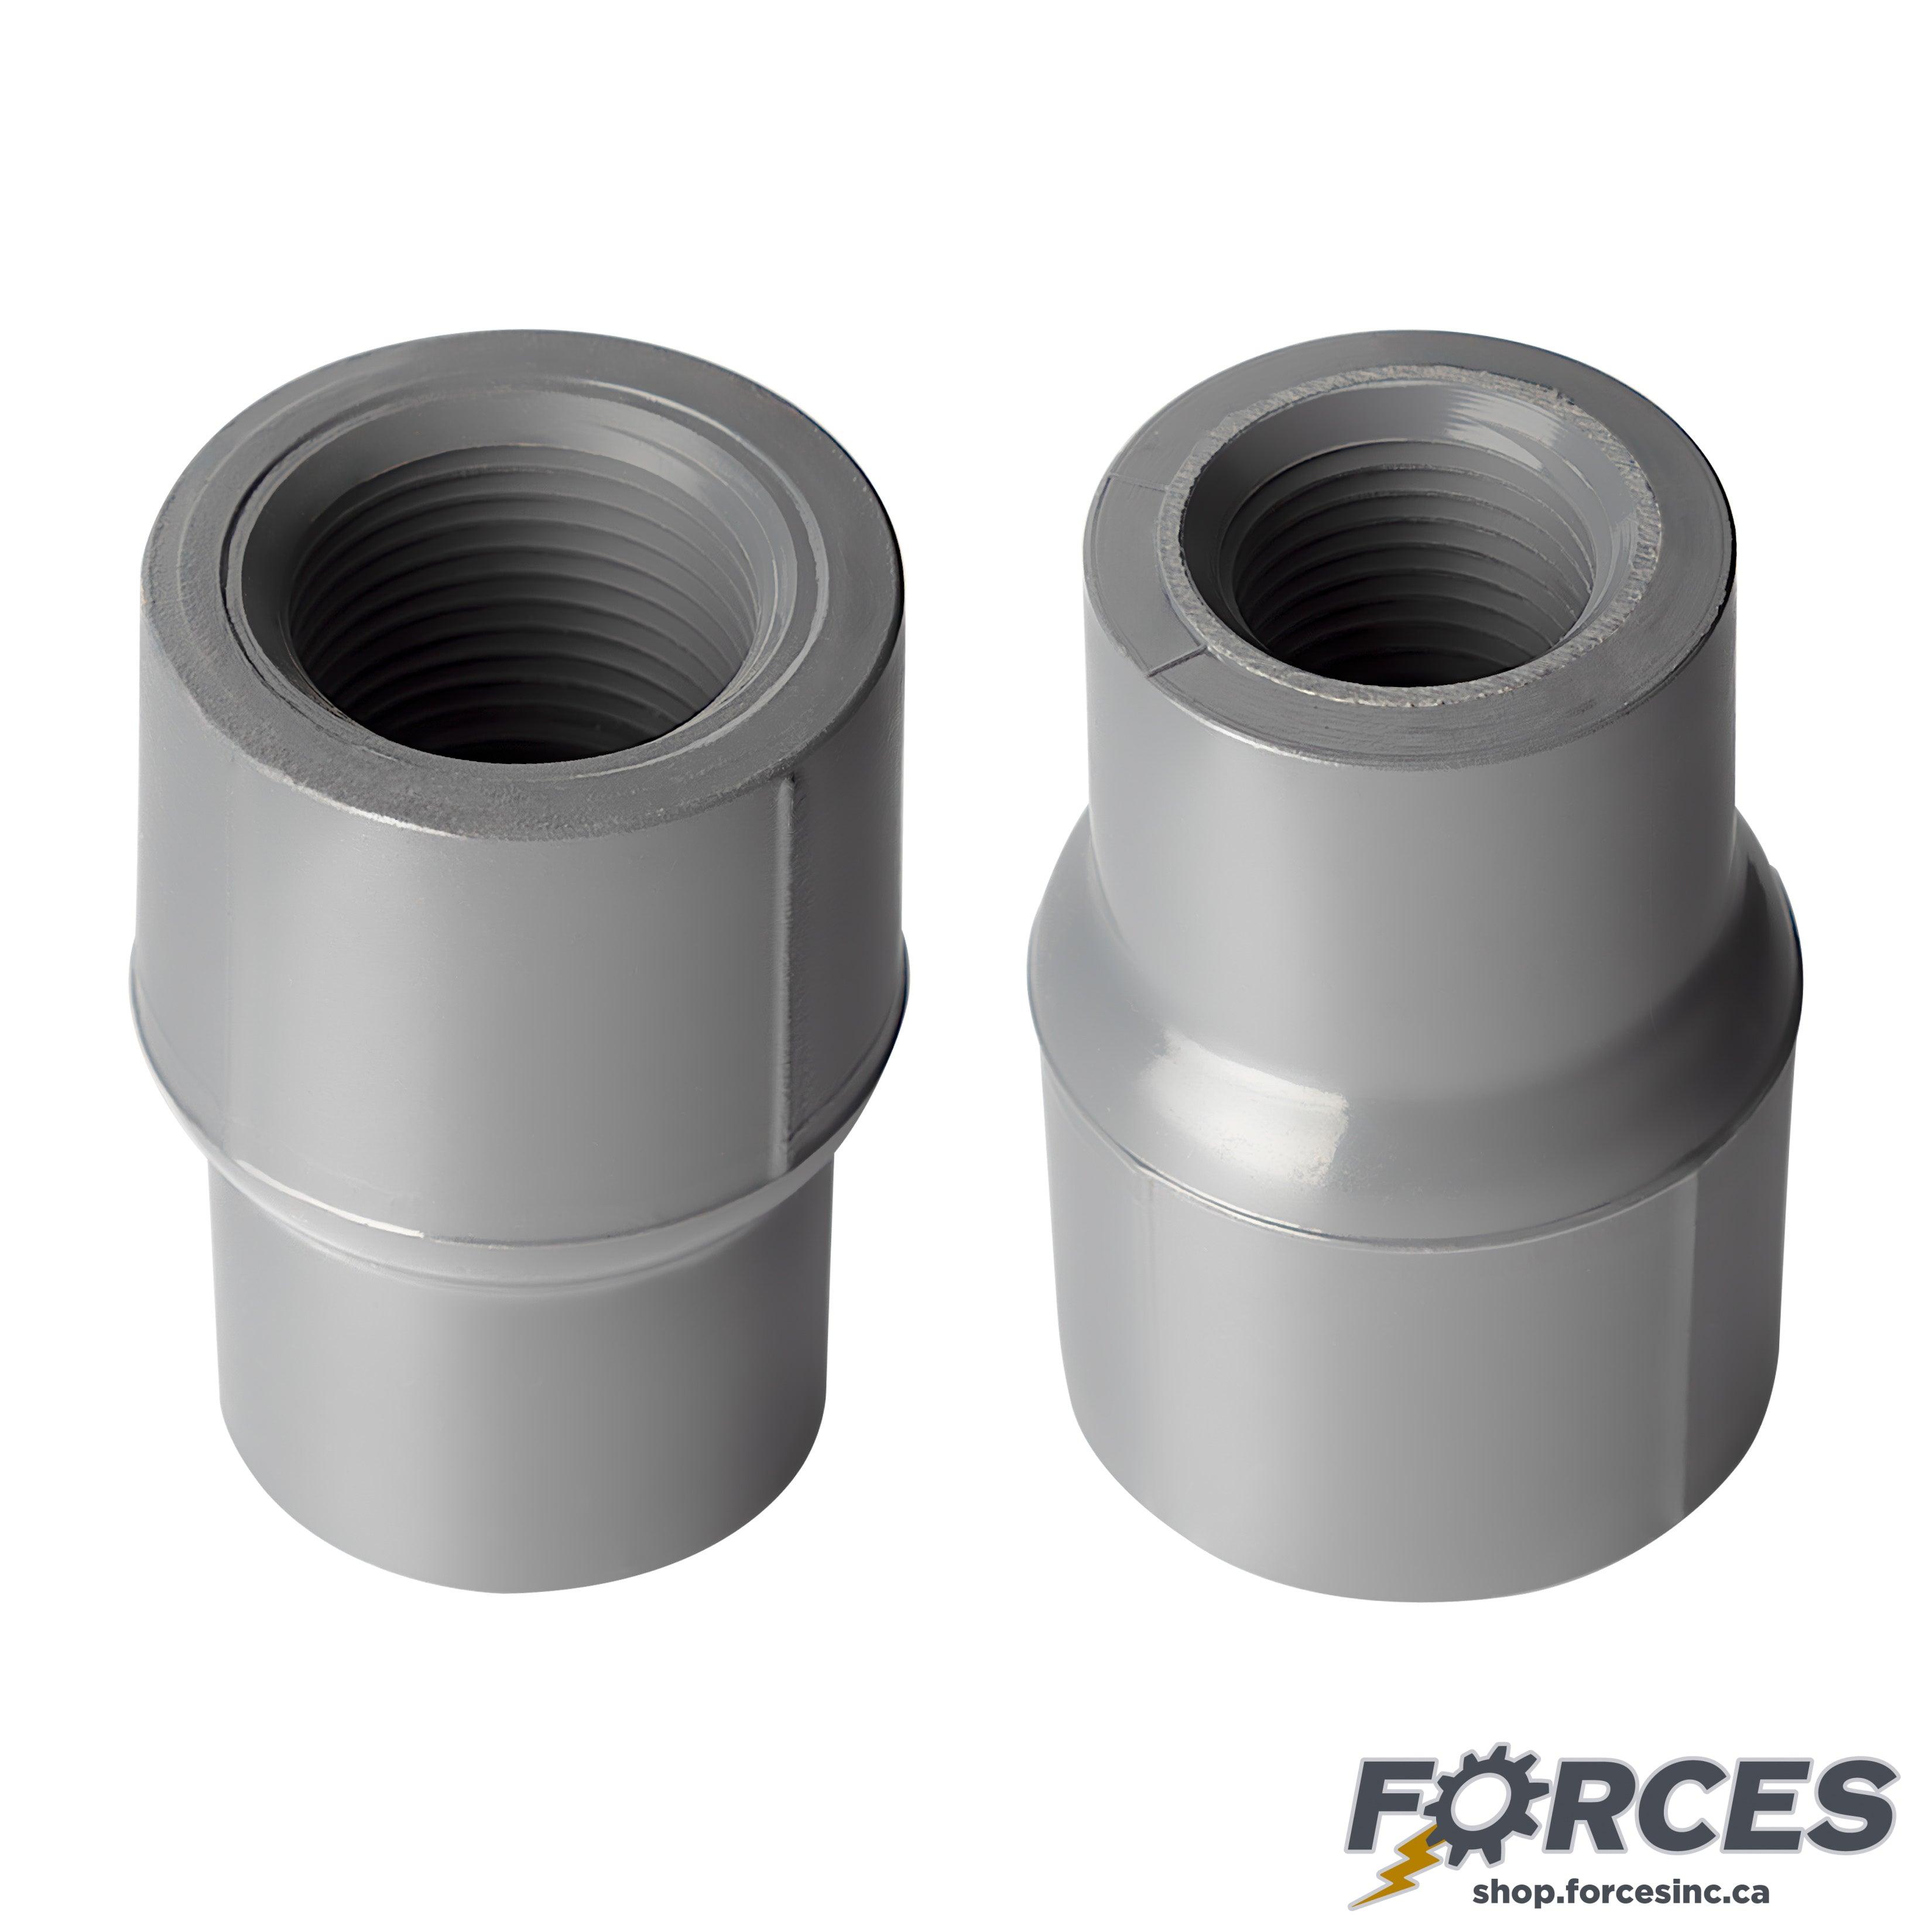 3/4" x 1/2" Reducing Coupling (Threaded) Sch 80 - PVC Grey | 830101 - Forces Inc